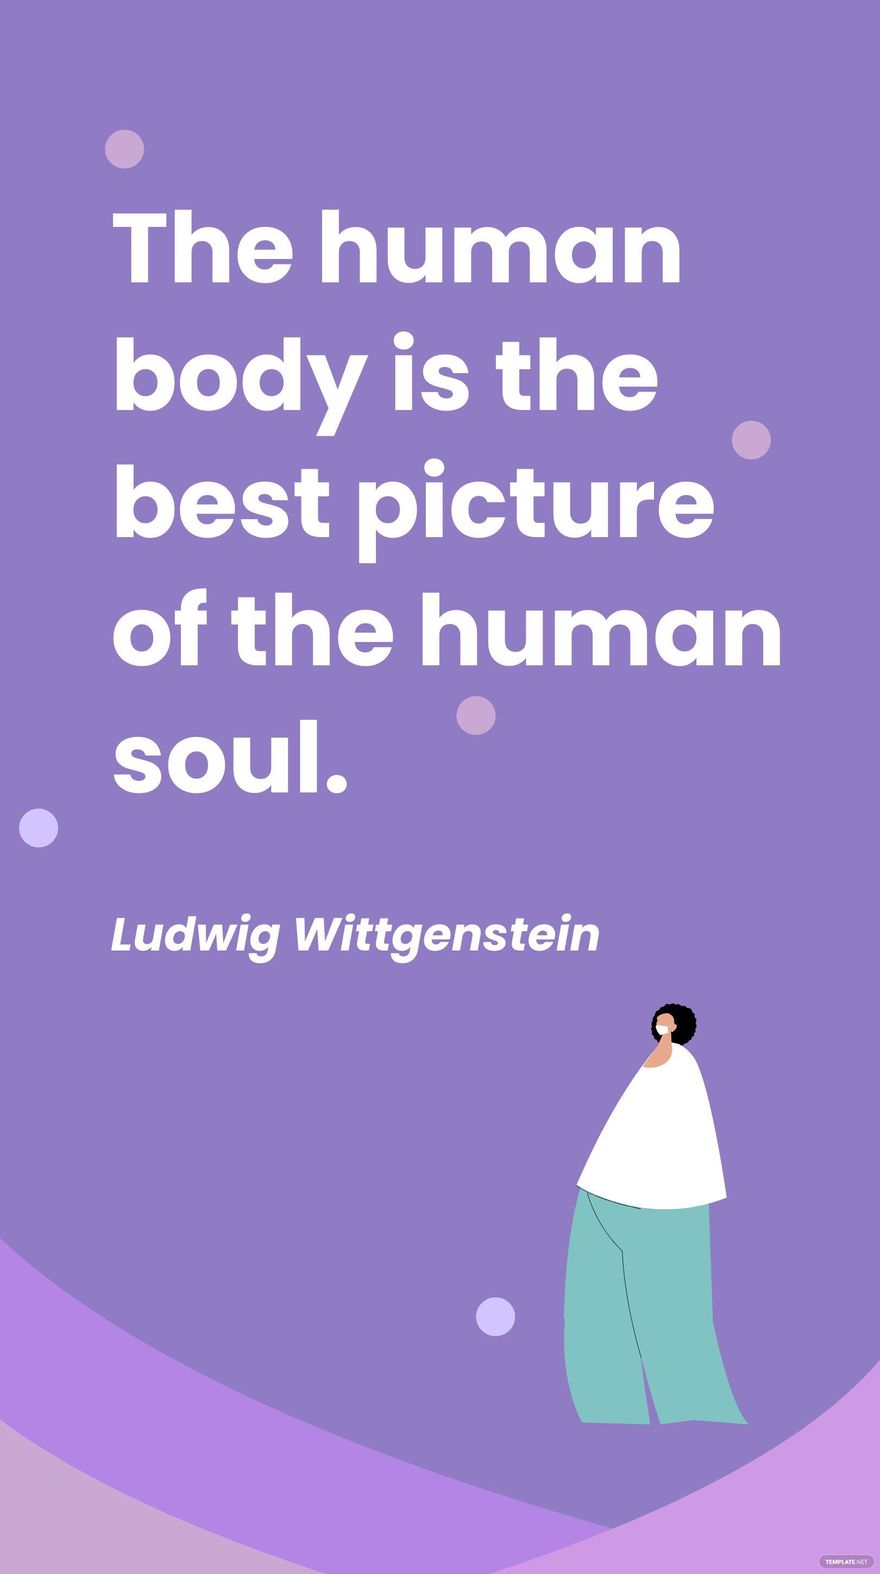 Free Ludwig Wittgenstein - The human body is the best picture of the human soul. in JPG